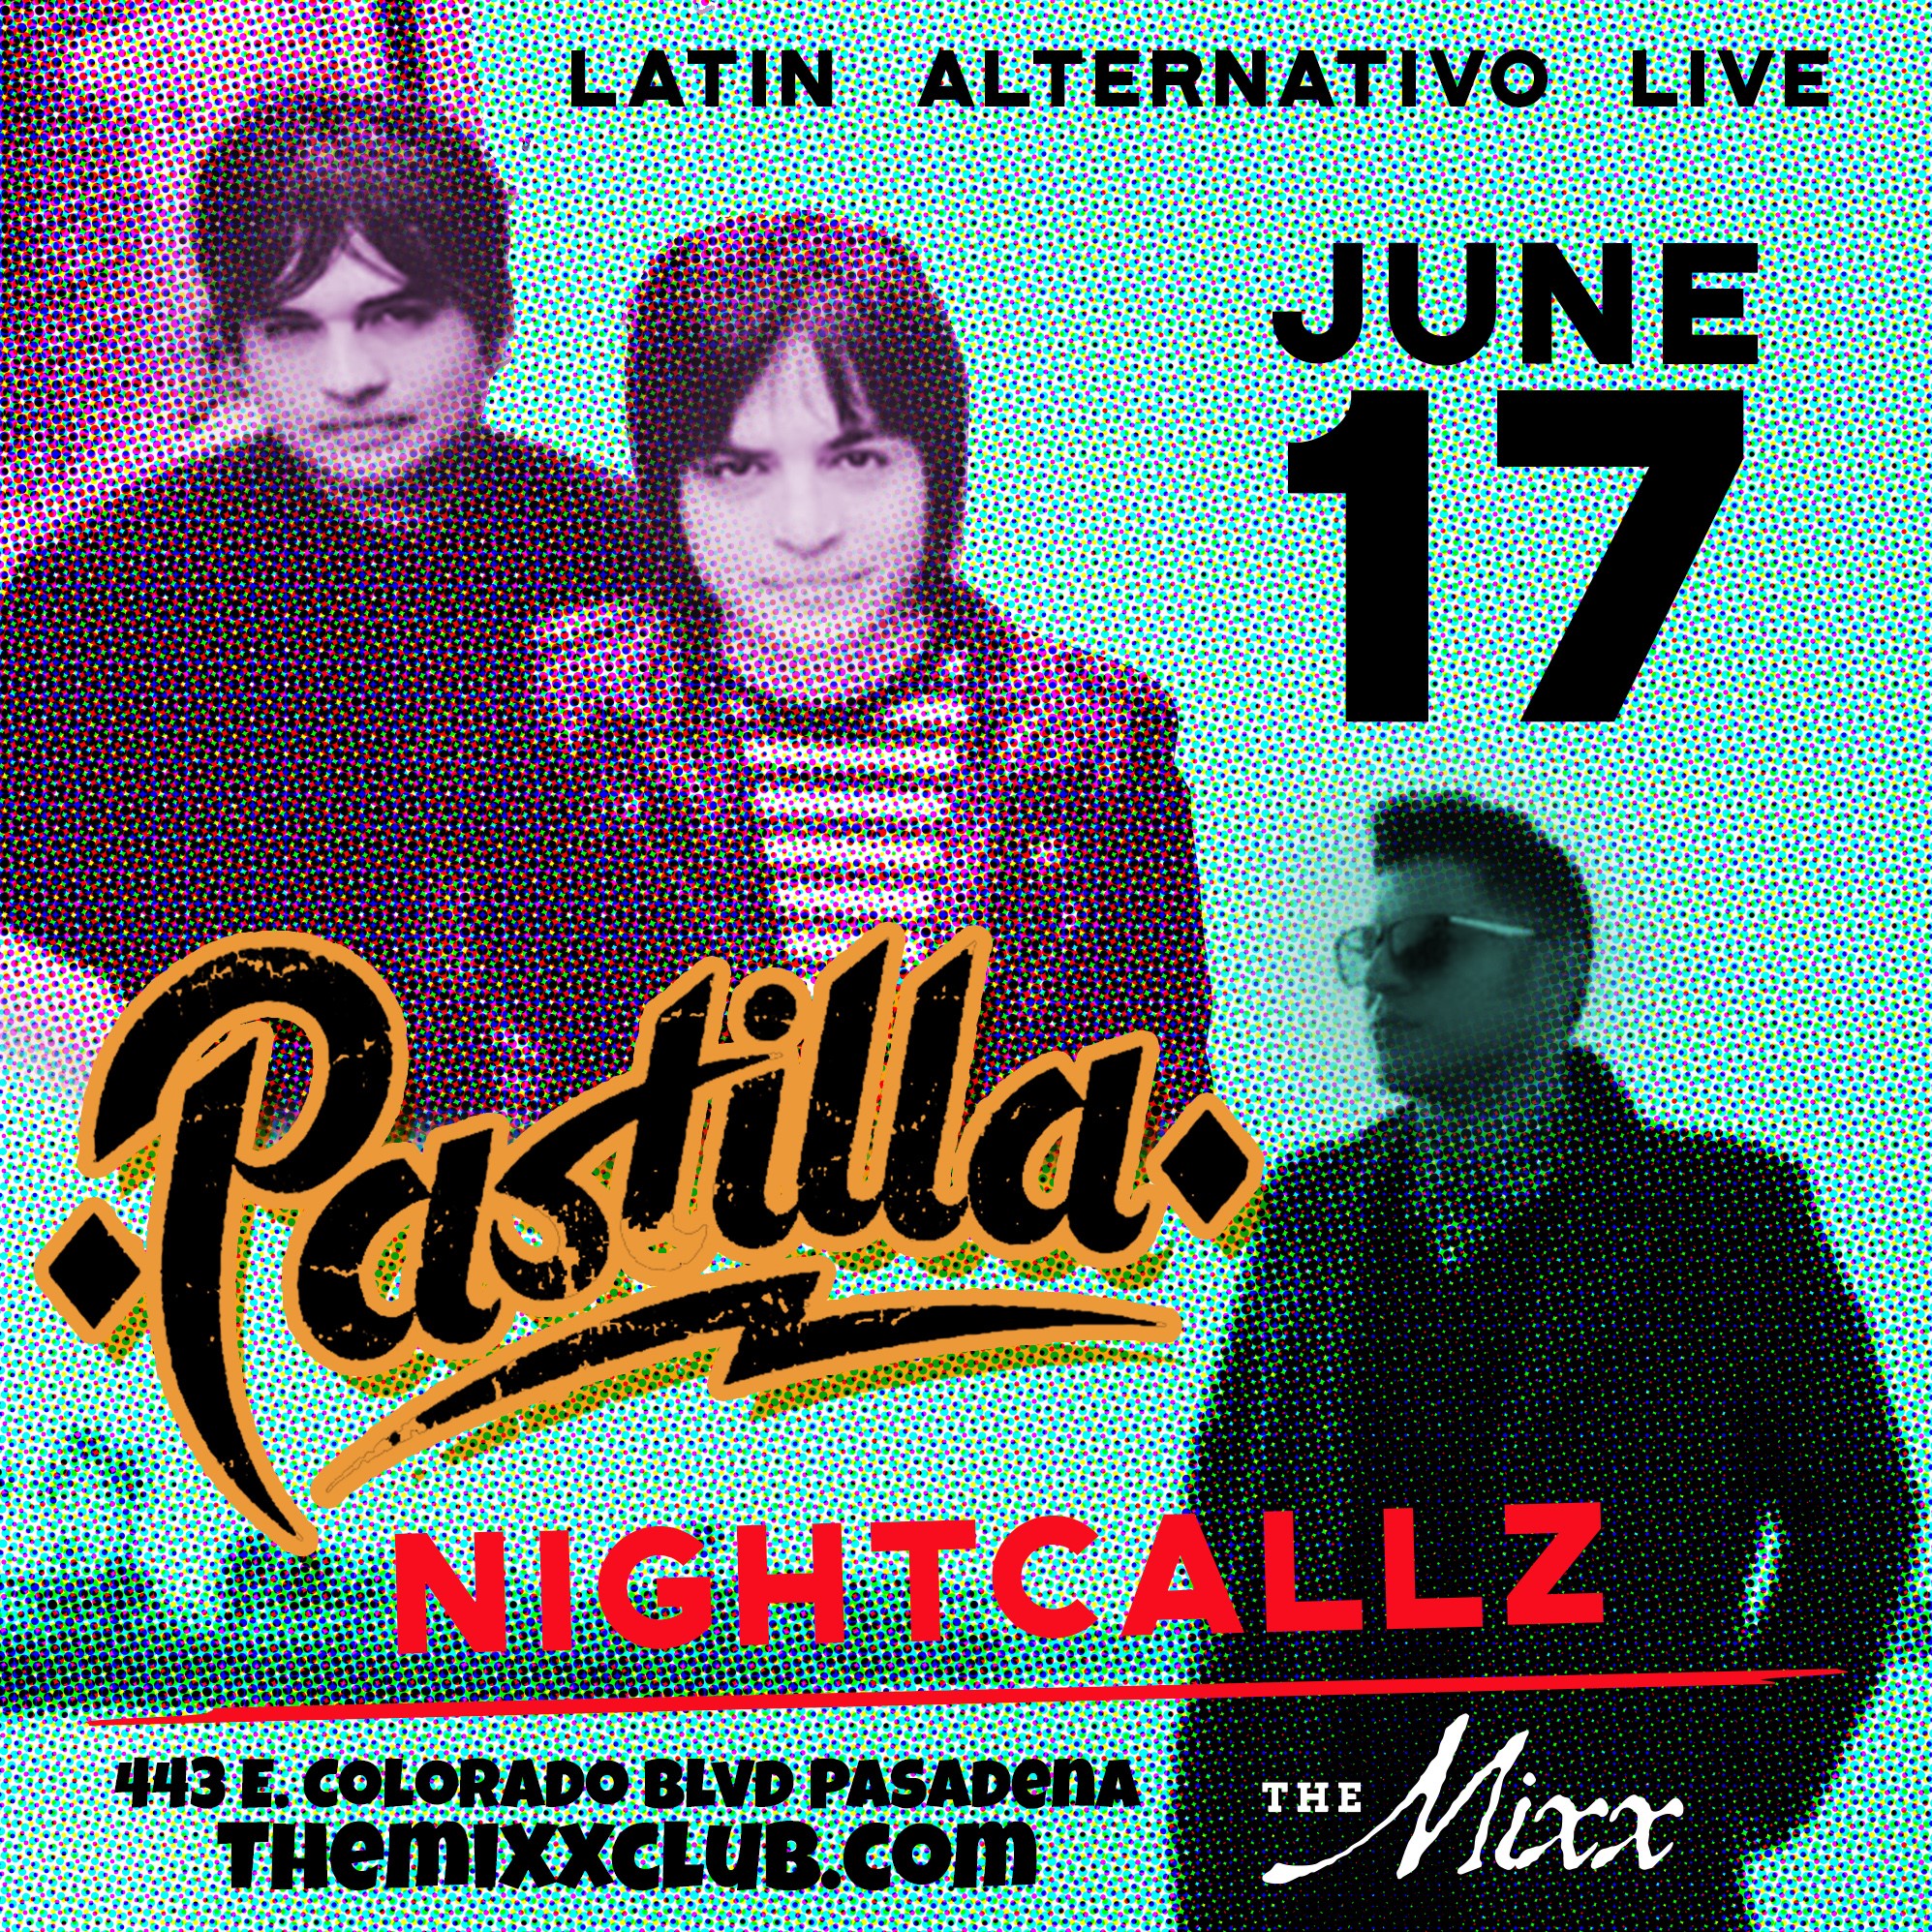 You are currently viewing PASTILLA + Nightcallz Latin Alternative Indie Show